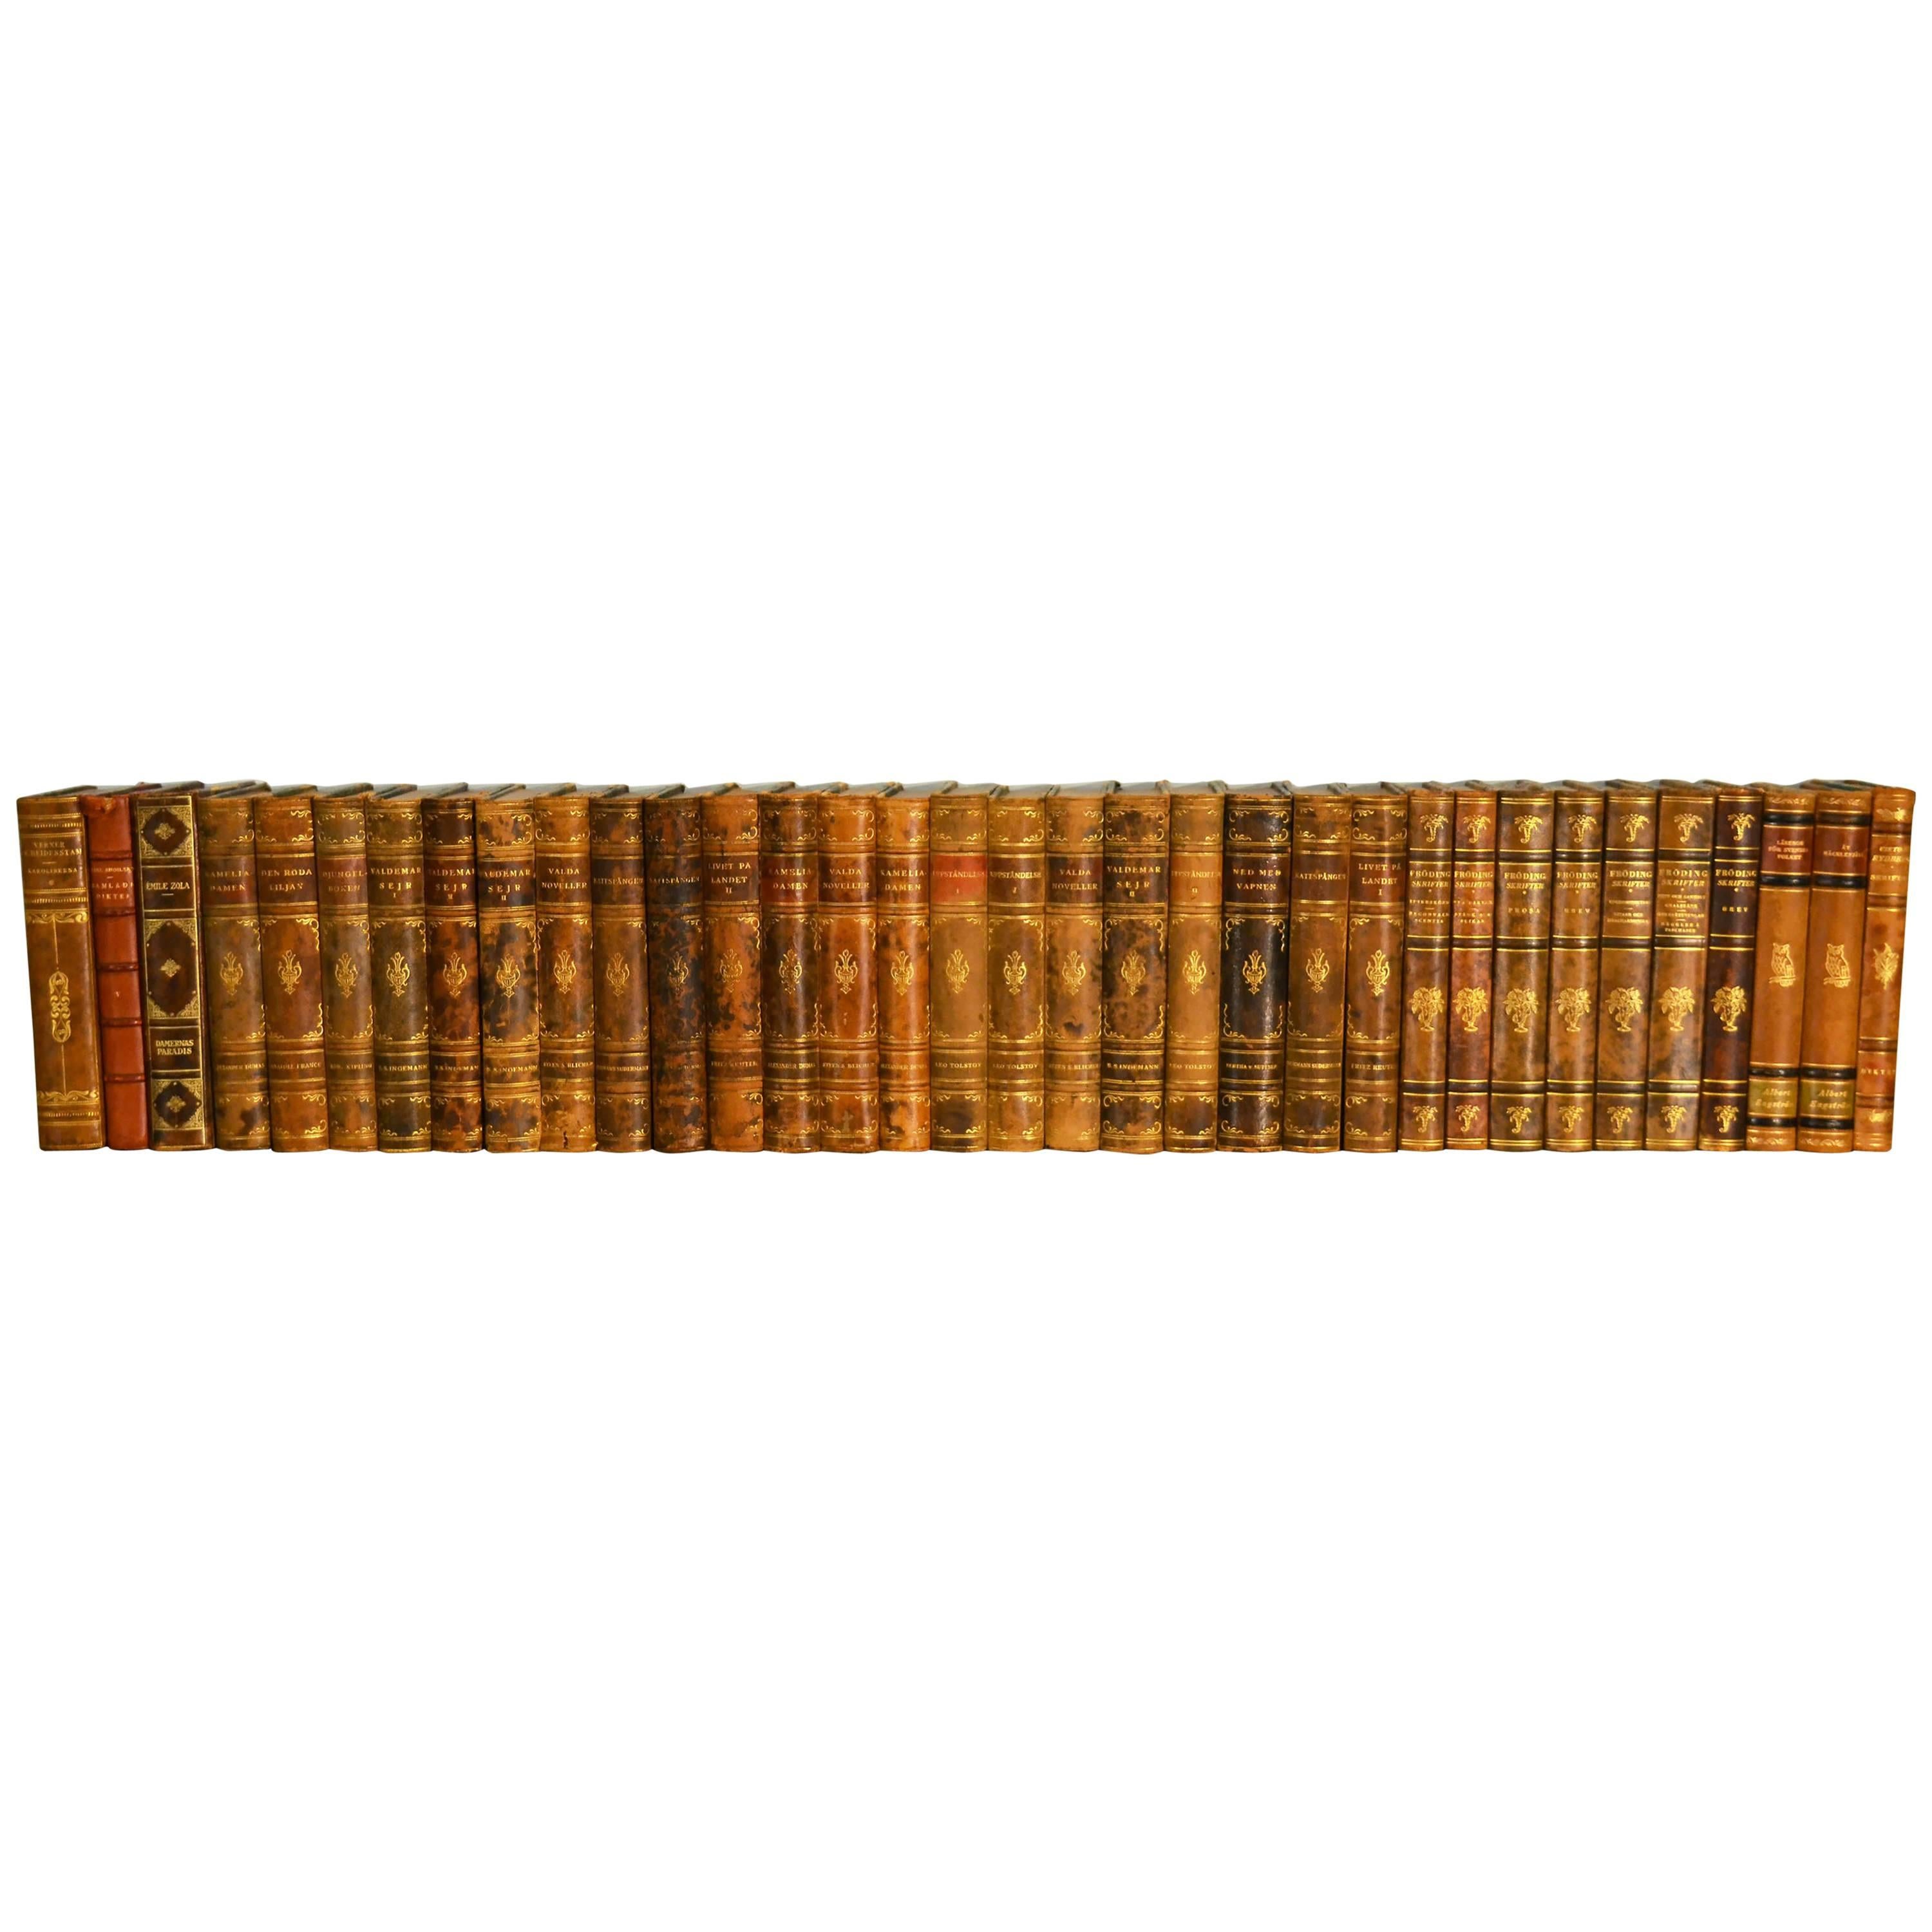 Collection of Leather Bound Books, Series 105